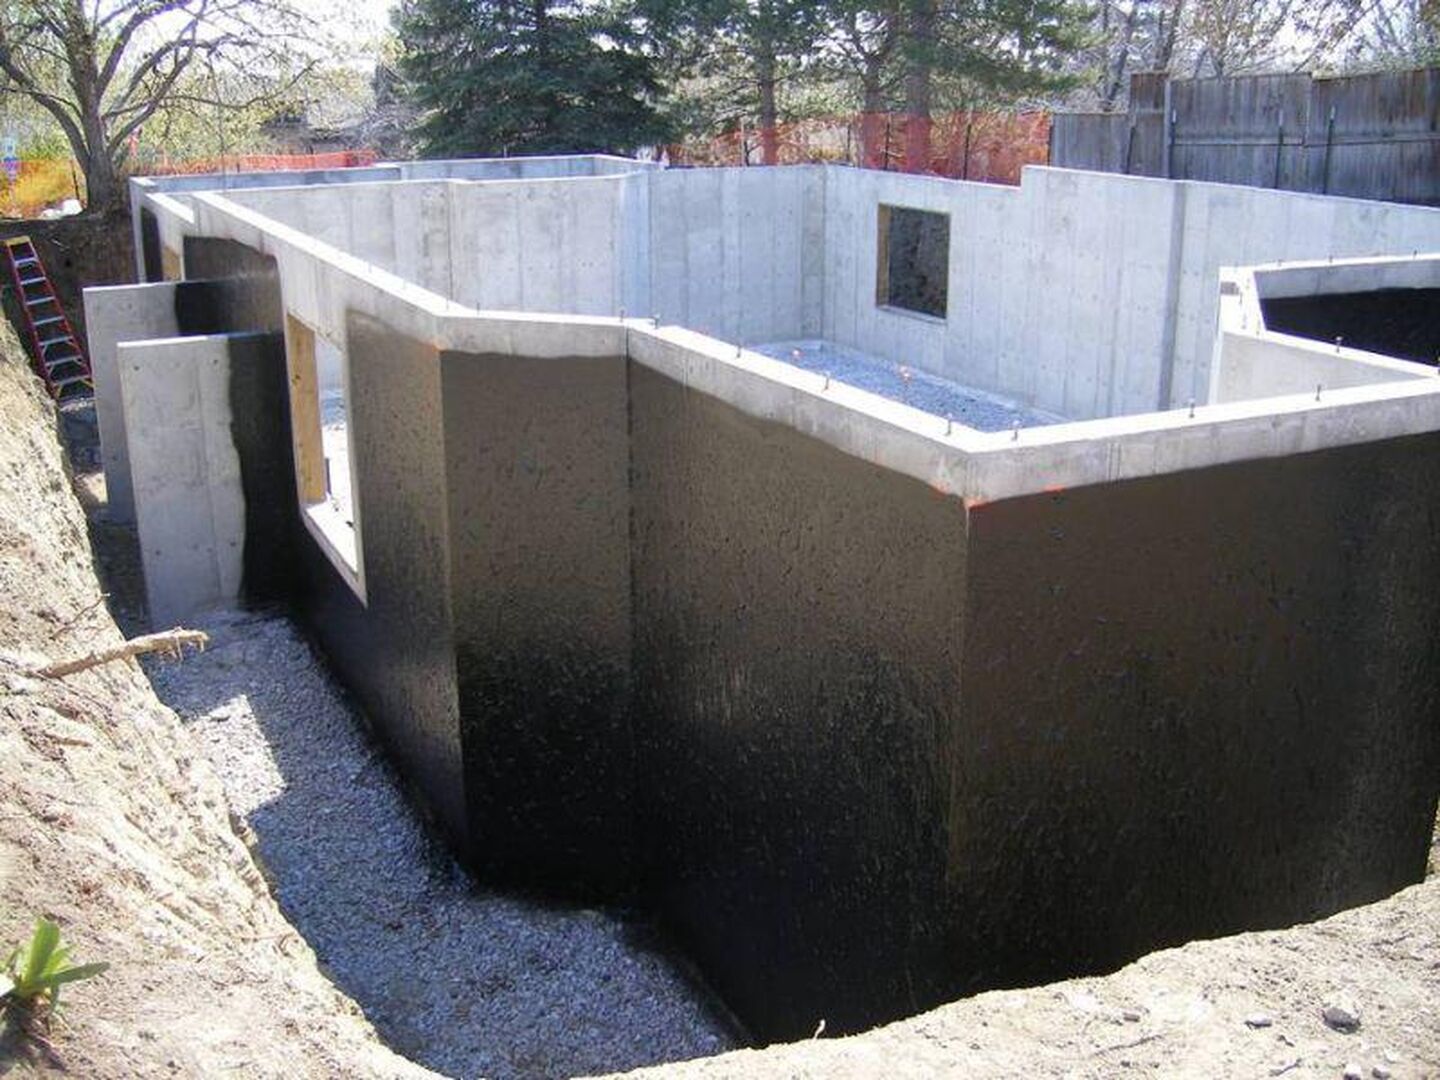 Professional waterproofing being applied in a Canton basement, showcasing All American Basement Waterproofing's dedication to home protection